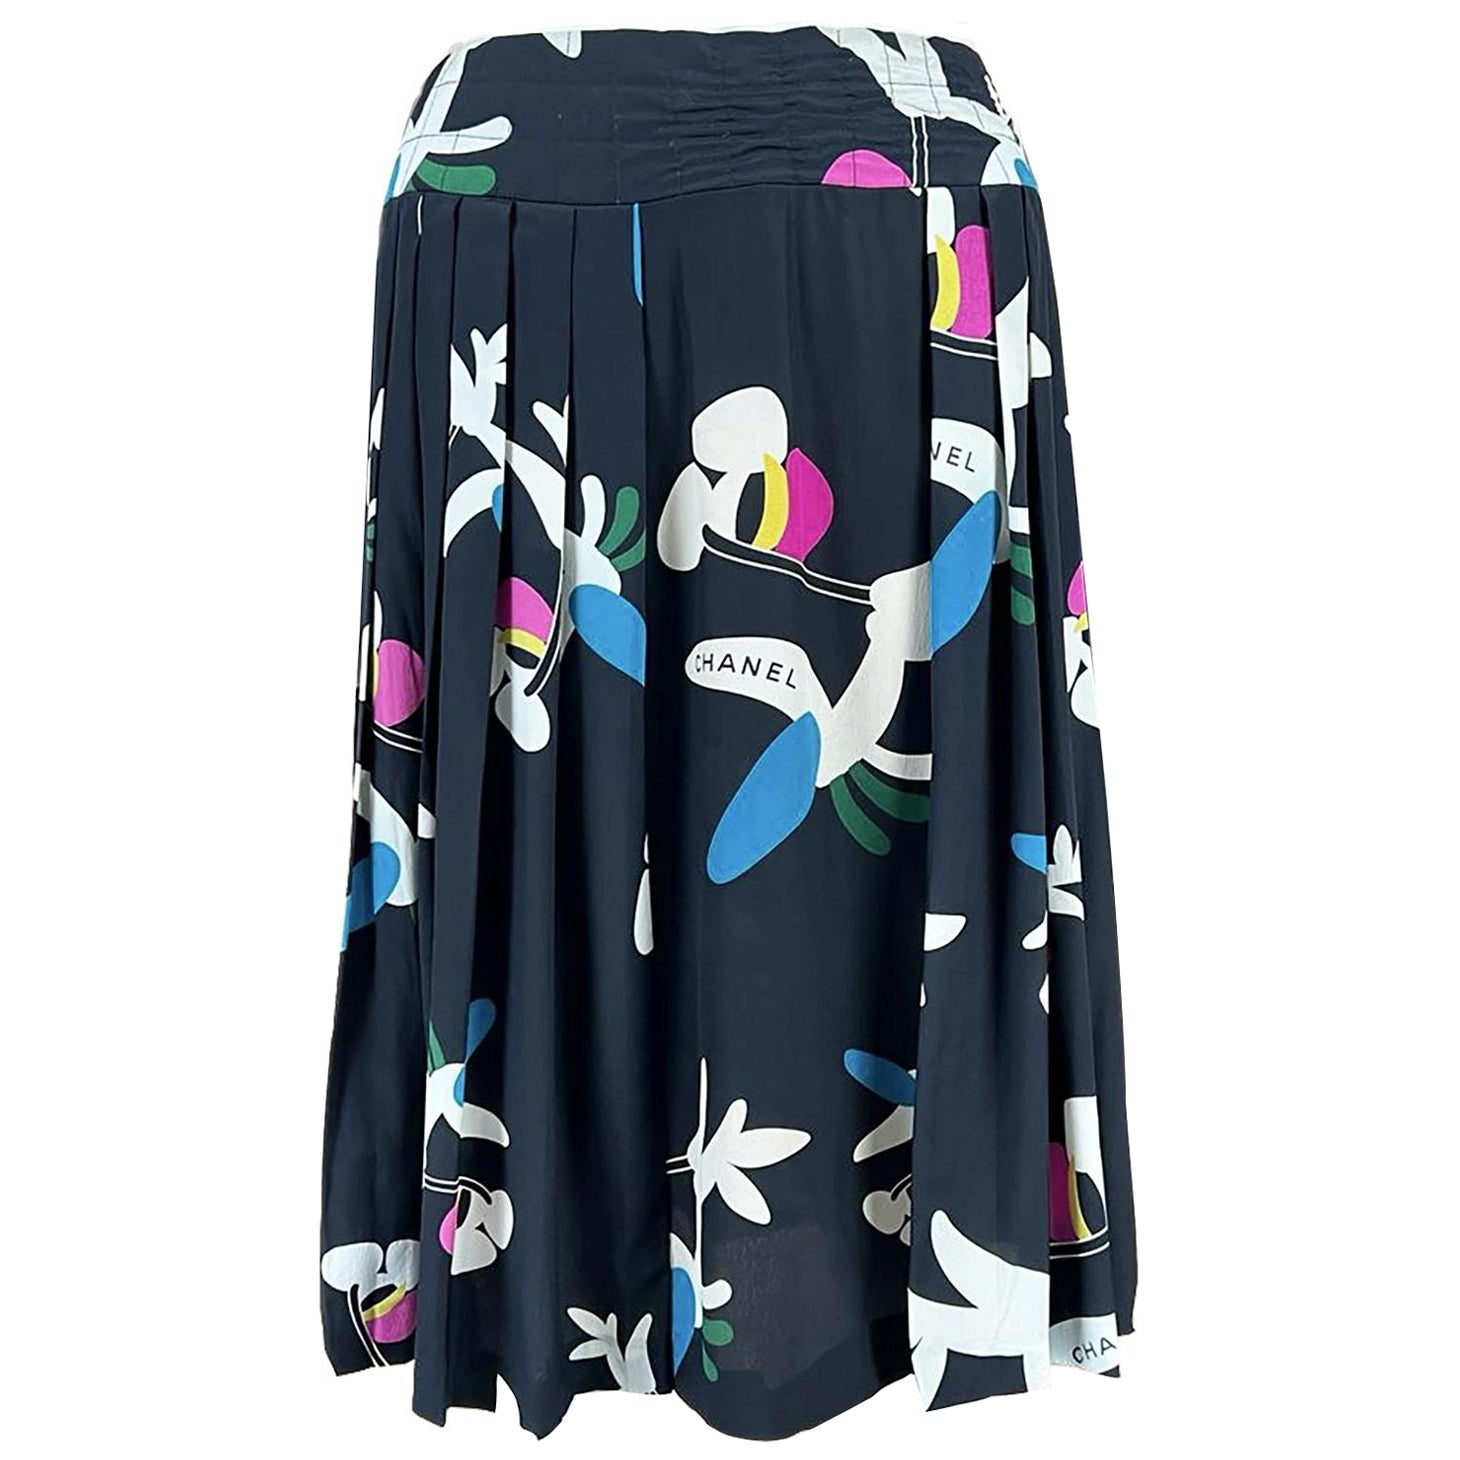 Chanel Rare CC Planes Quilted Details Skirt